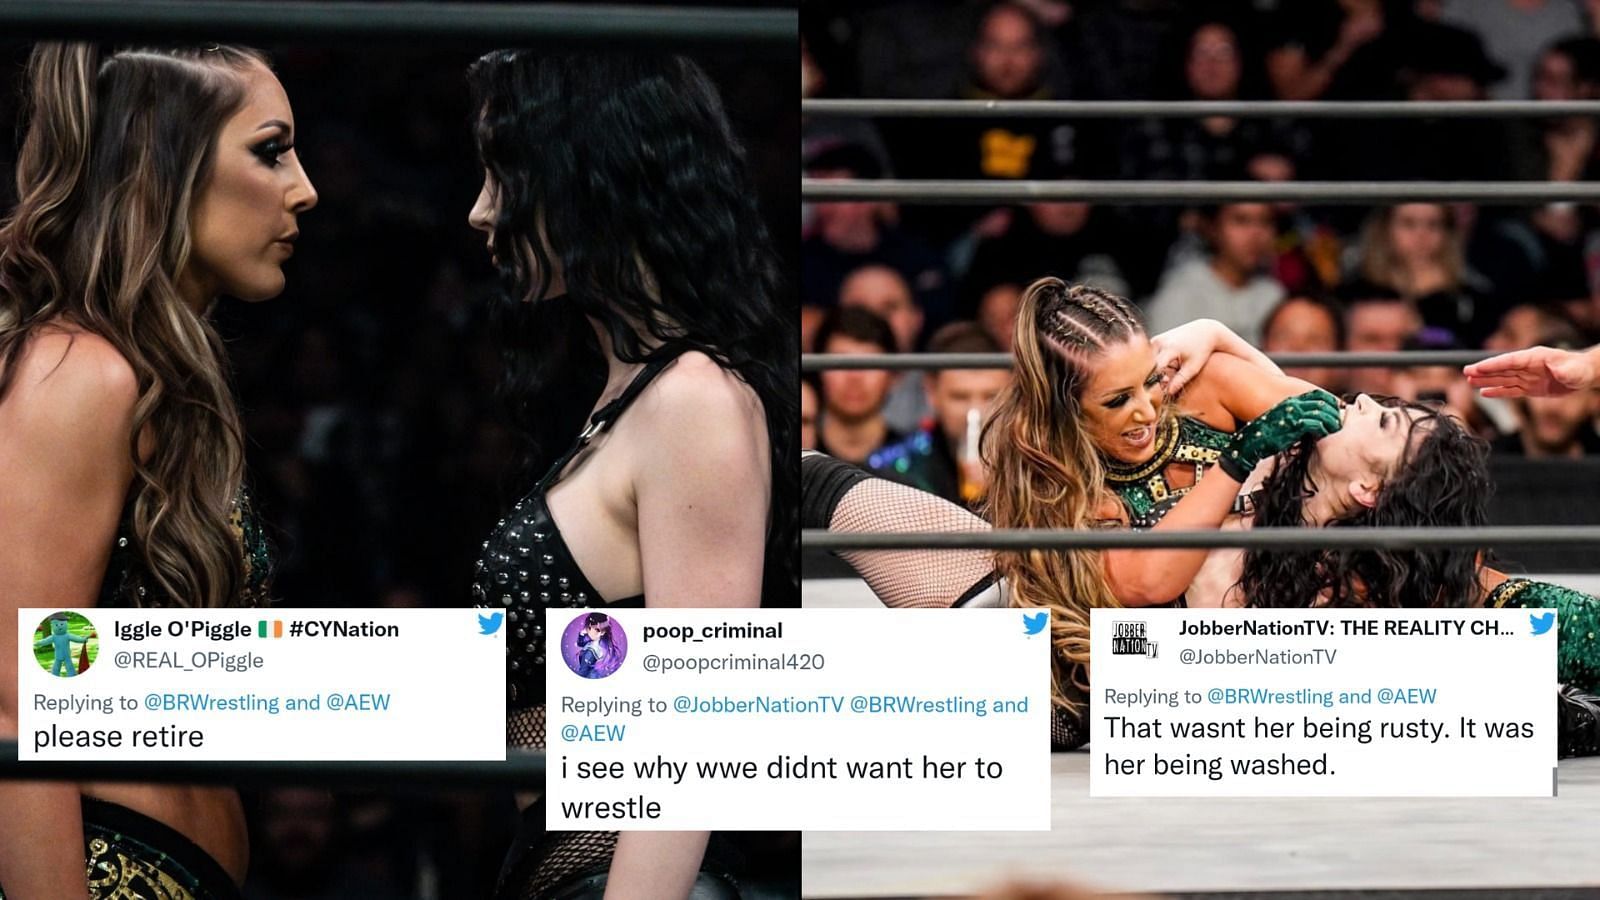 Saraya (fka Paige) had her first match in five years against Britt Baker at AEW Full Gear 2022.